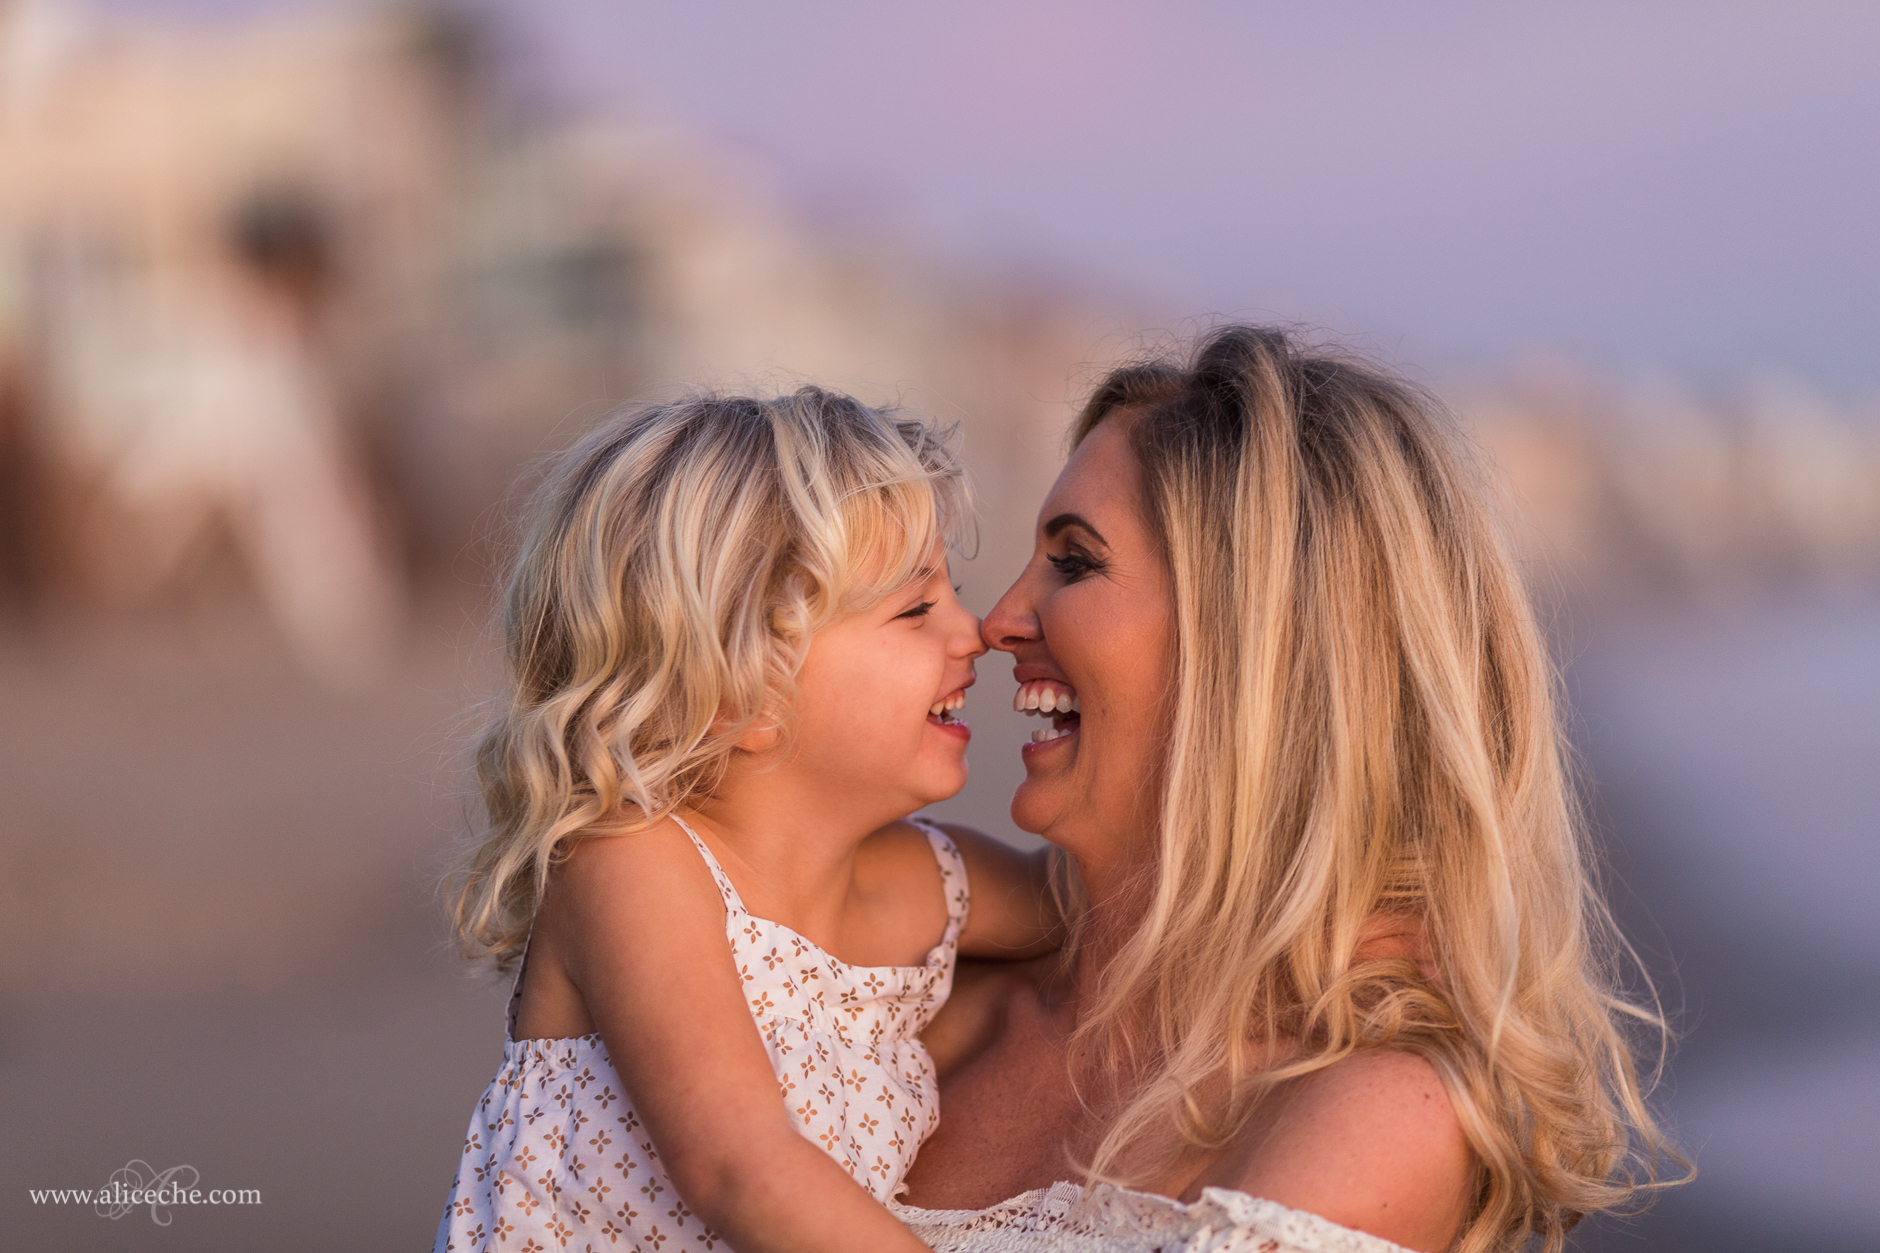 alice-che-photography-blair-thurston-retreat-malibu-family-session-matching-smiles-mom-and-daughter